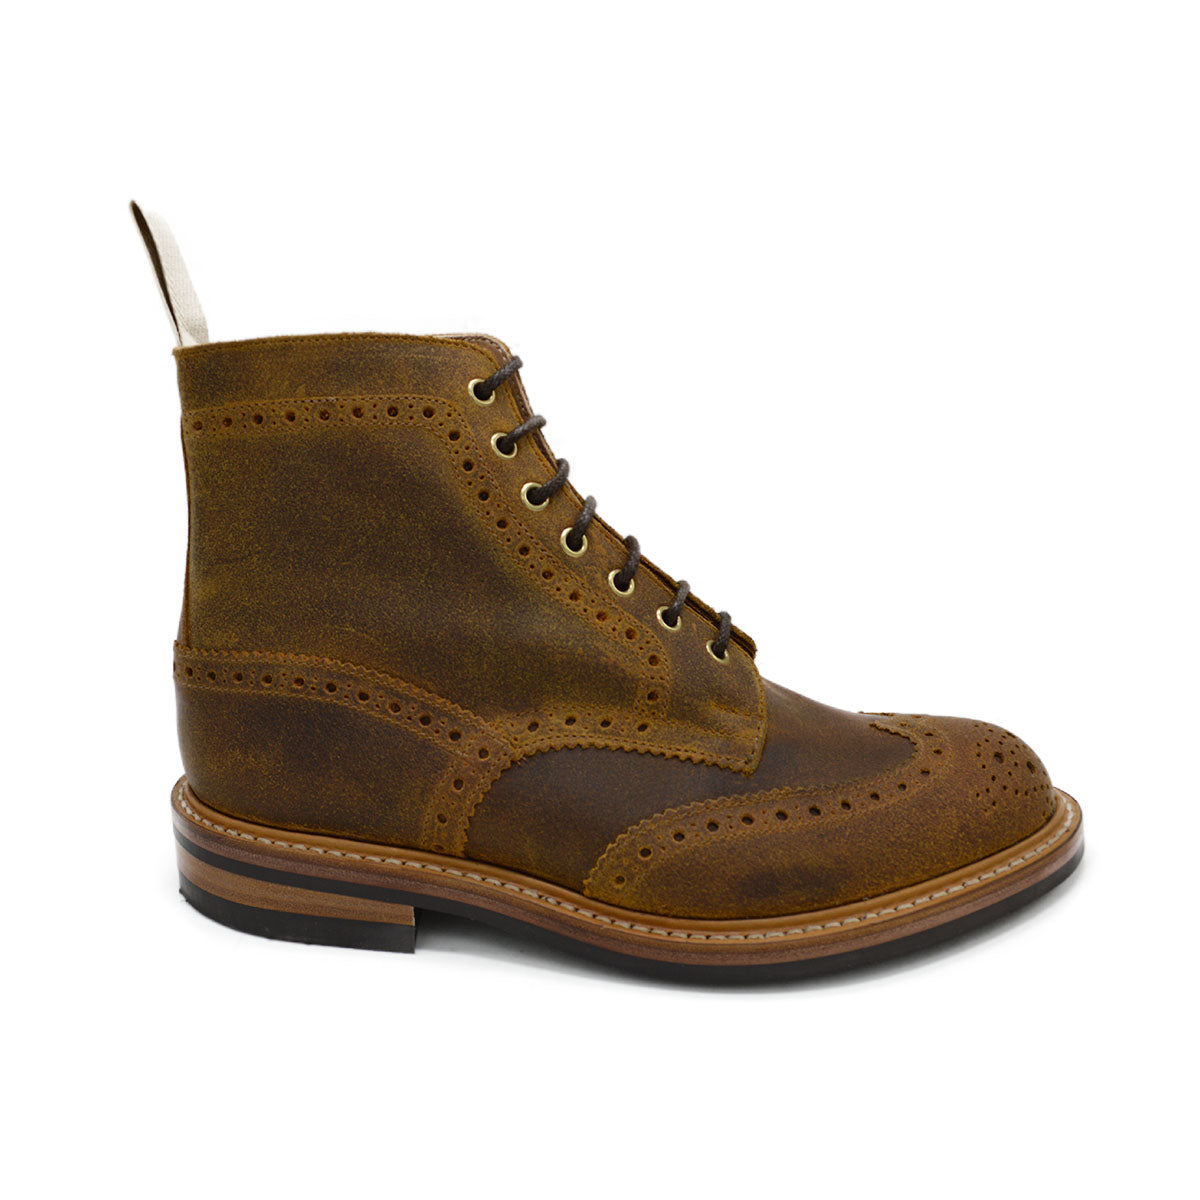 Trickers Stow - Cuba Waxy Commander – A Fine Pair of Shoes